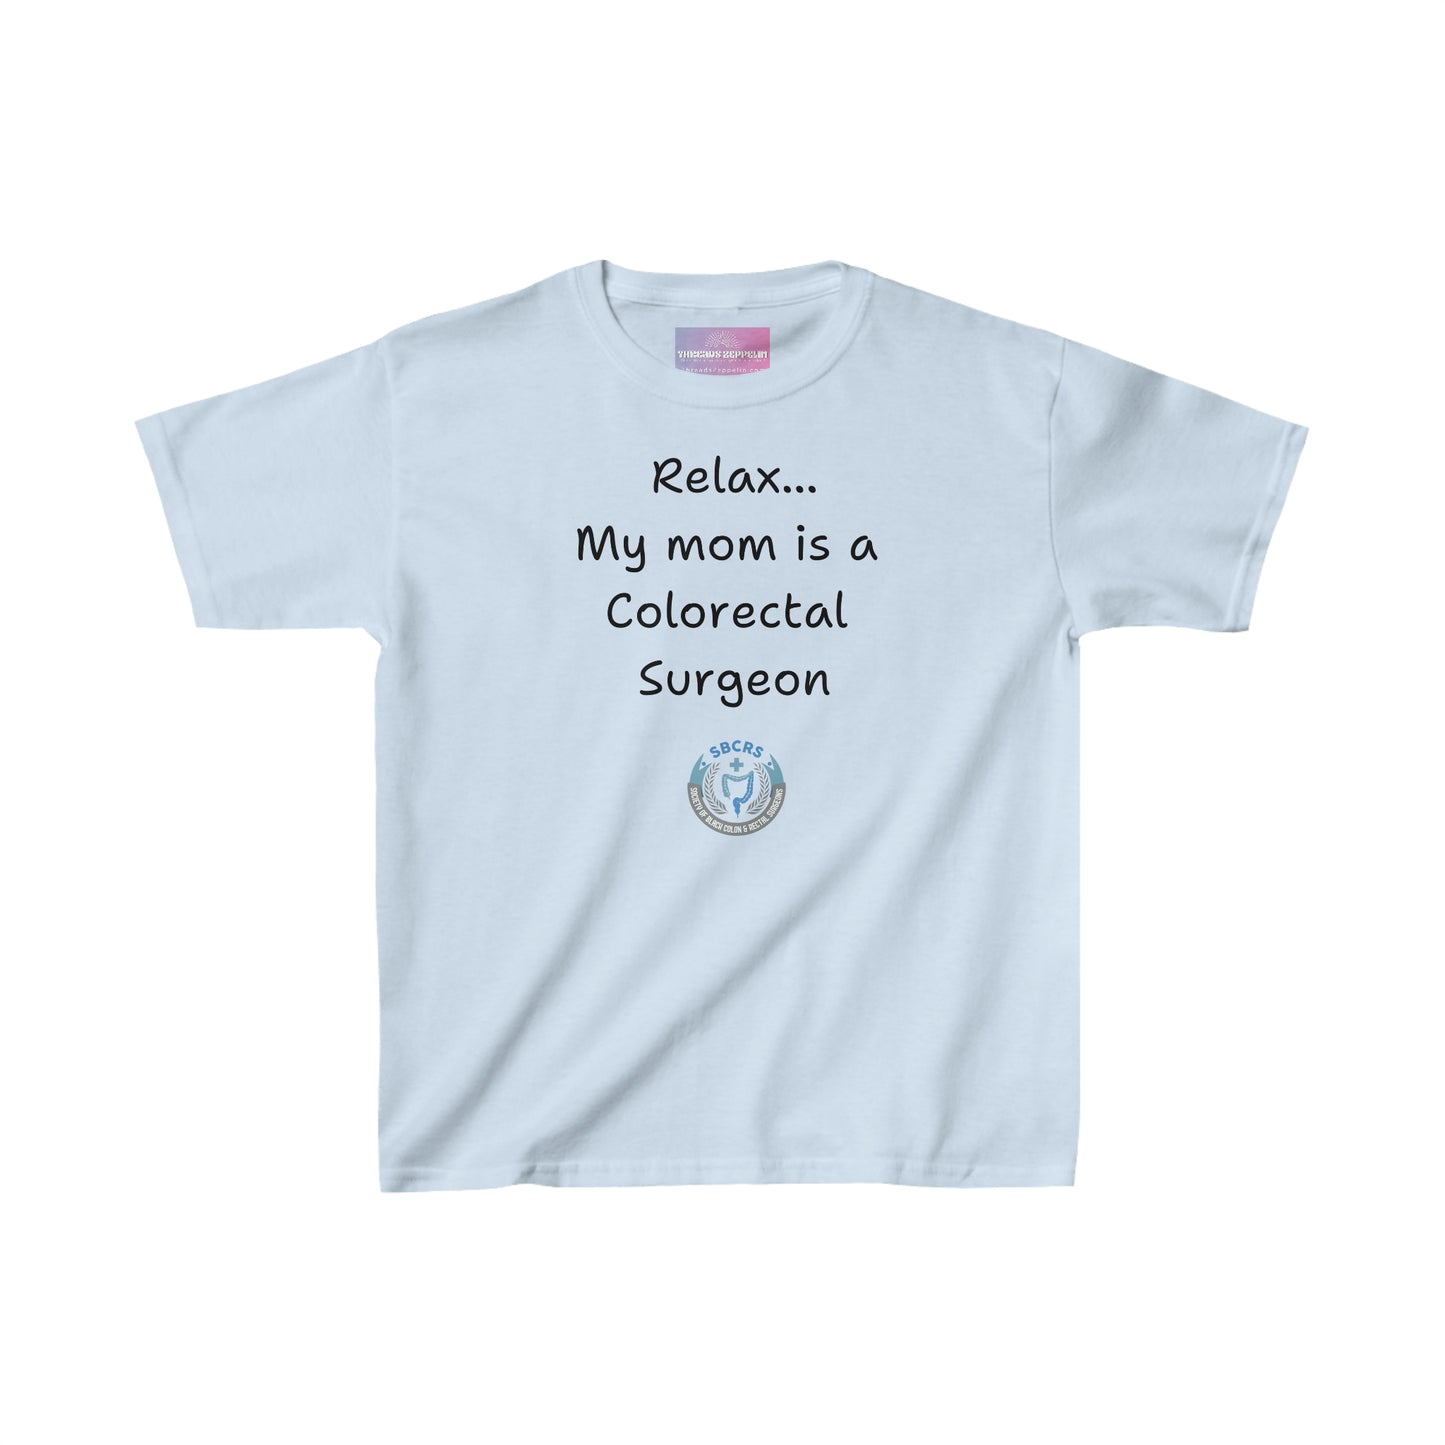 Relax, My Mom is a Colorectal Surgeon Kids Heavy Cotton Tee